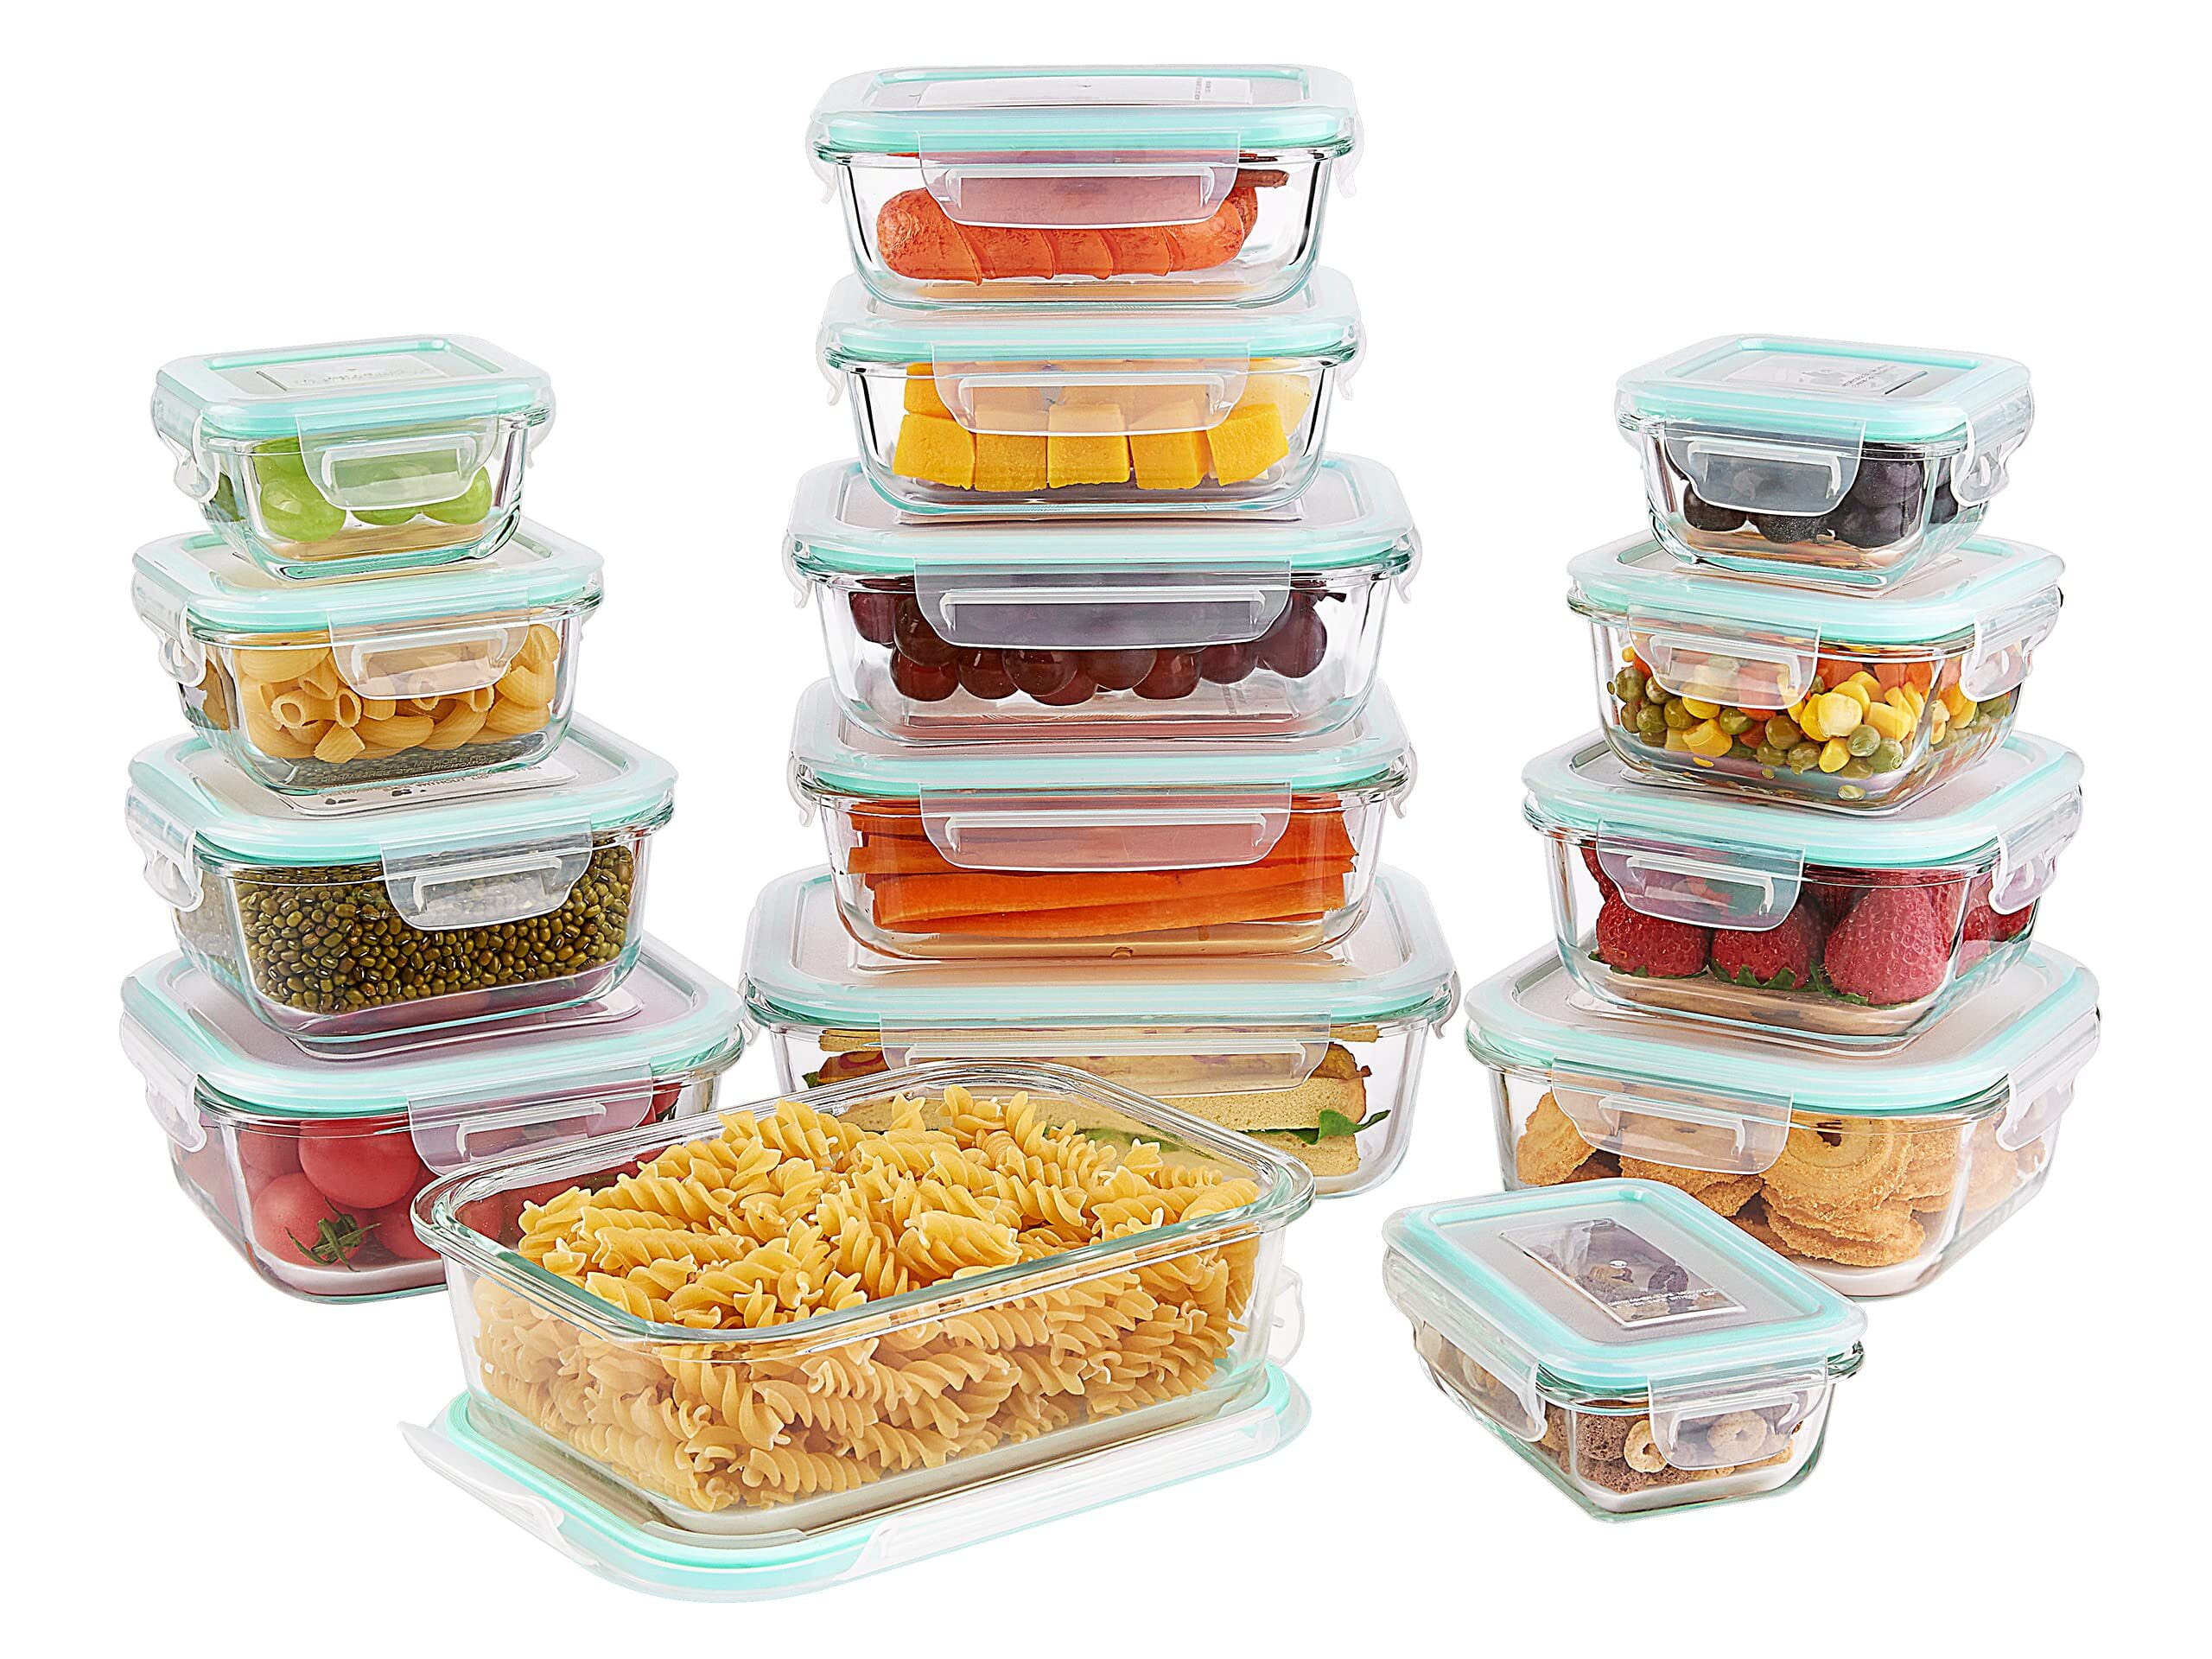 Vivostore Airtight Food Storage Containers with Airtight Lids Set - 2 PC  Set 1.5 QT&0.5QT - BPA Free - Push to Open Design 100percent Leakproof